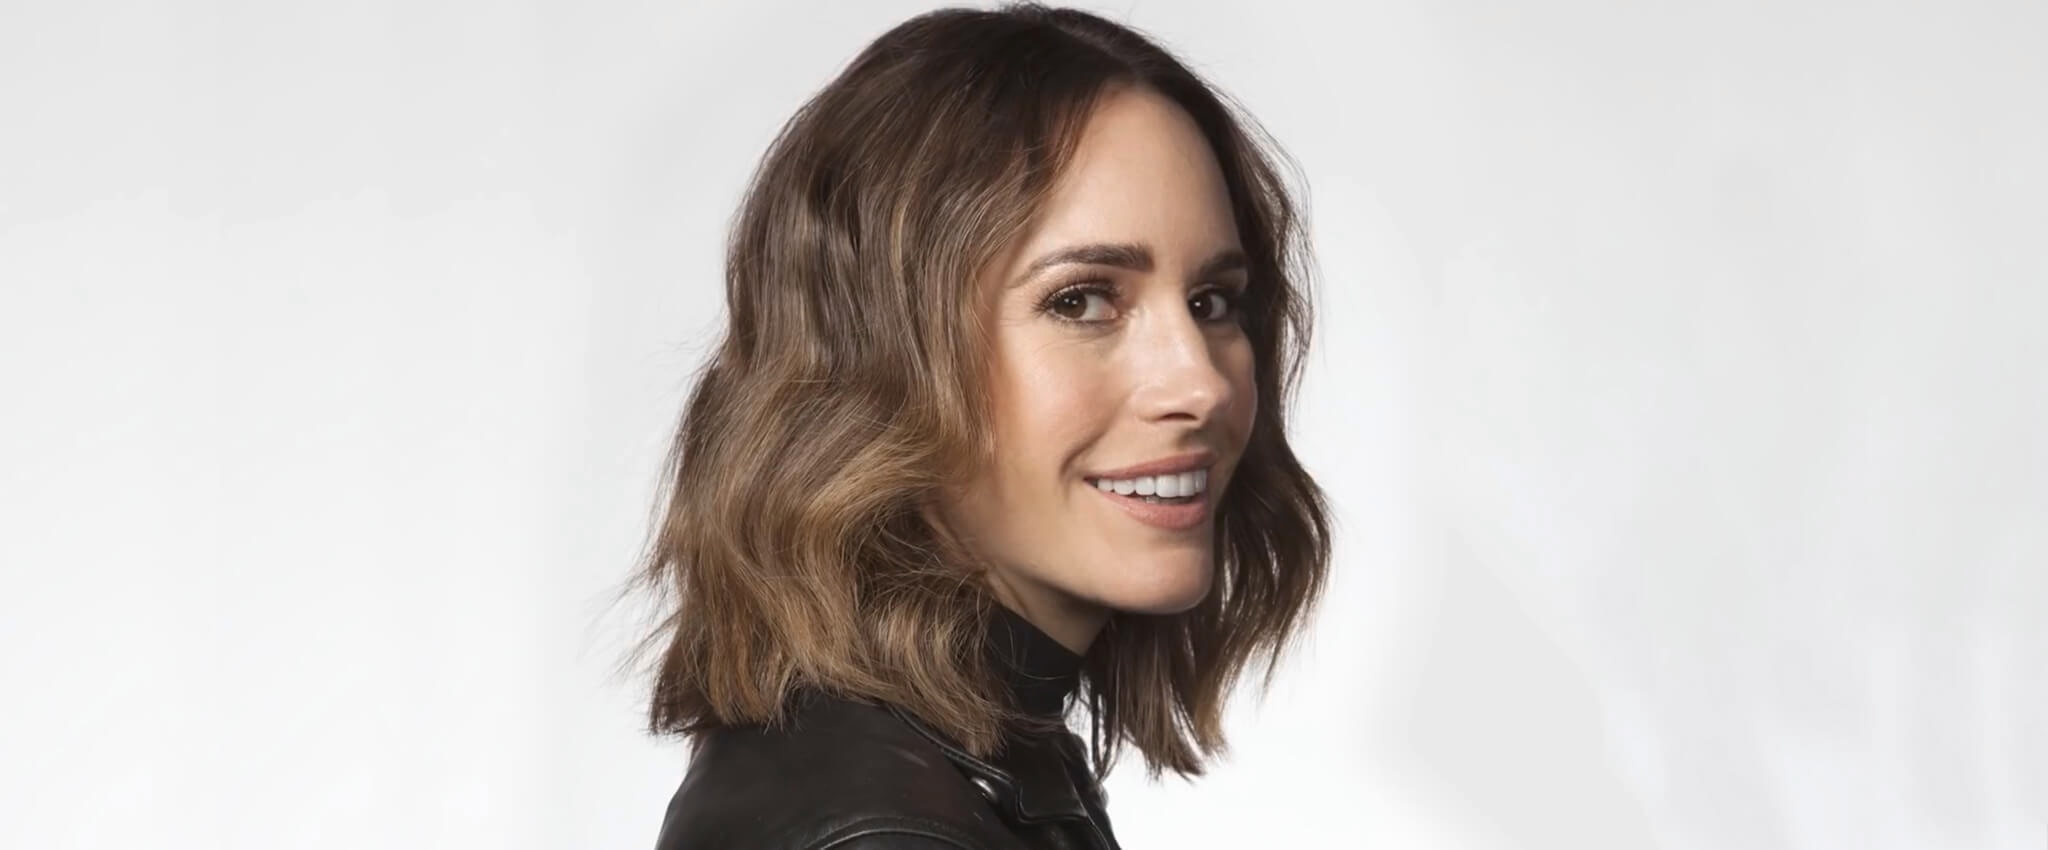 Louise Roe smiling at the camera, wearing a black leather biker jacket.